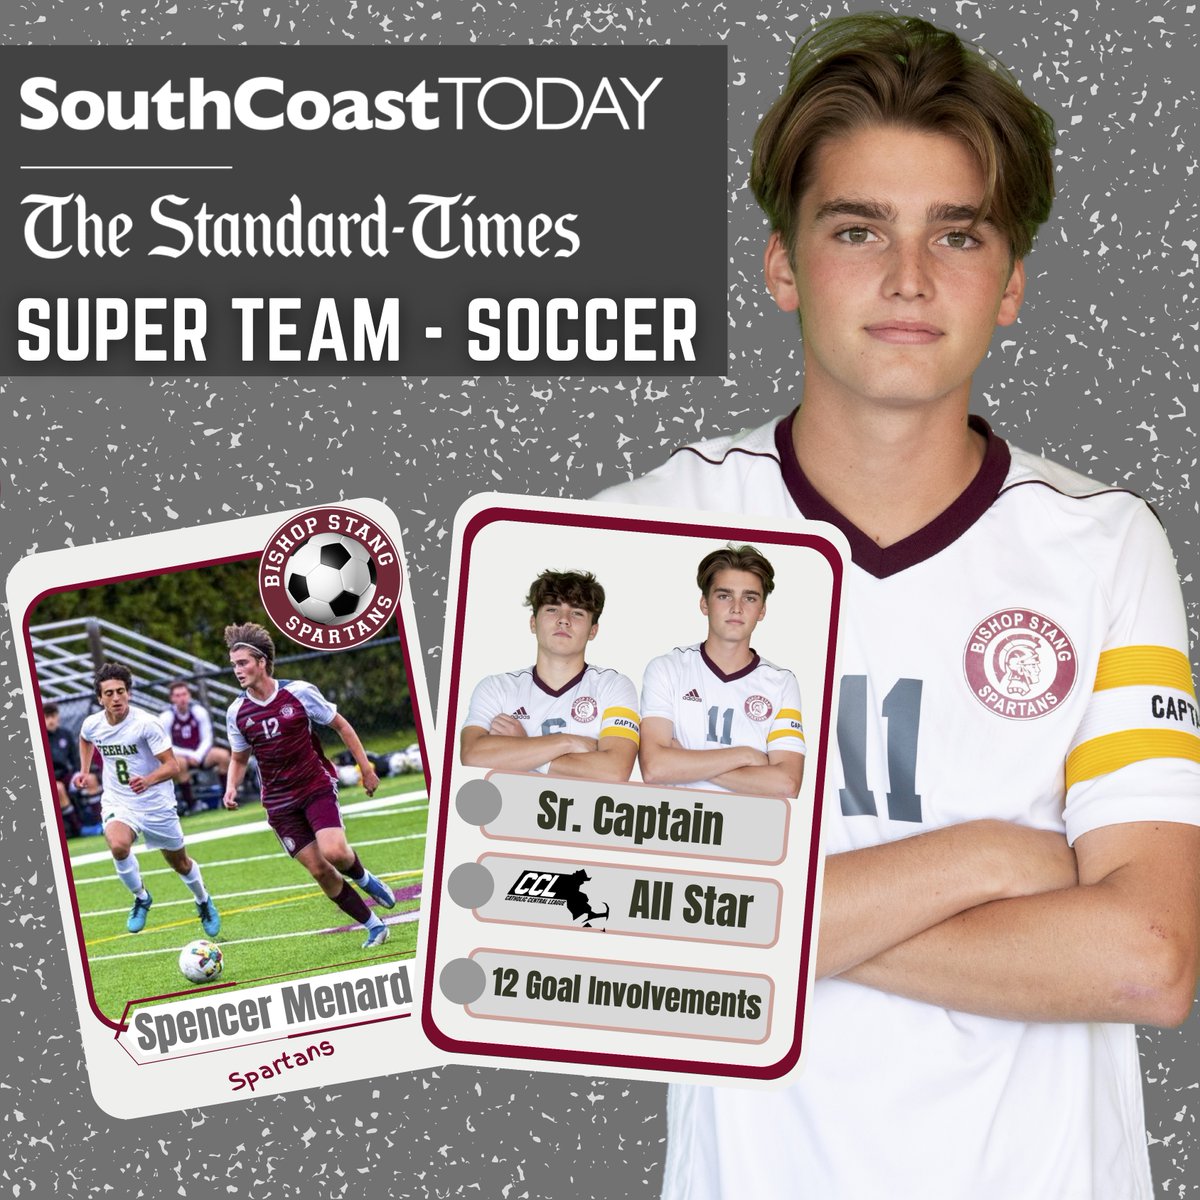 Congratulations to Sr. Spencer Menard on being named to the Standard Times Super Team for Boys Soccer! “Played a key role on offense for the Spartans with eight goals and four assists as an attacking midfielder' Congrats Spencer! @SC_Varsity